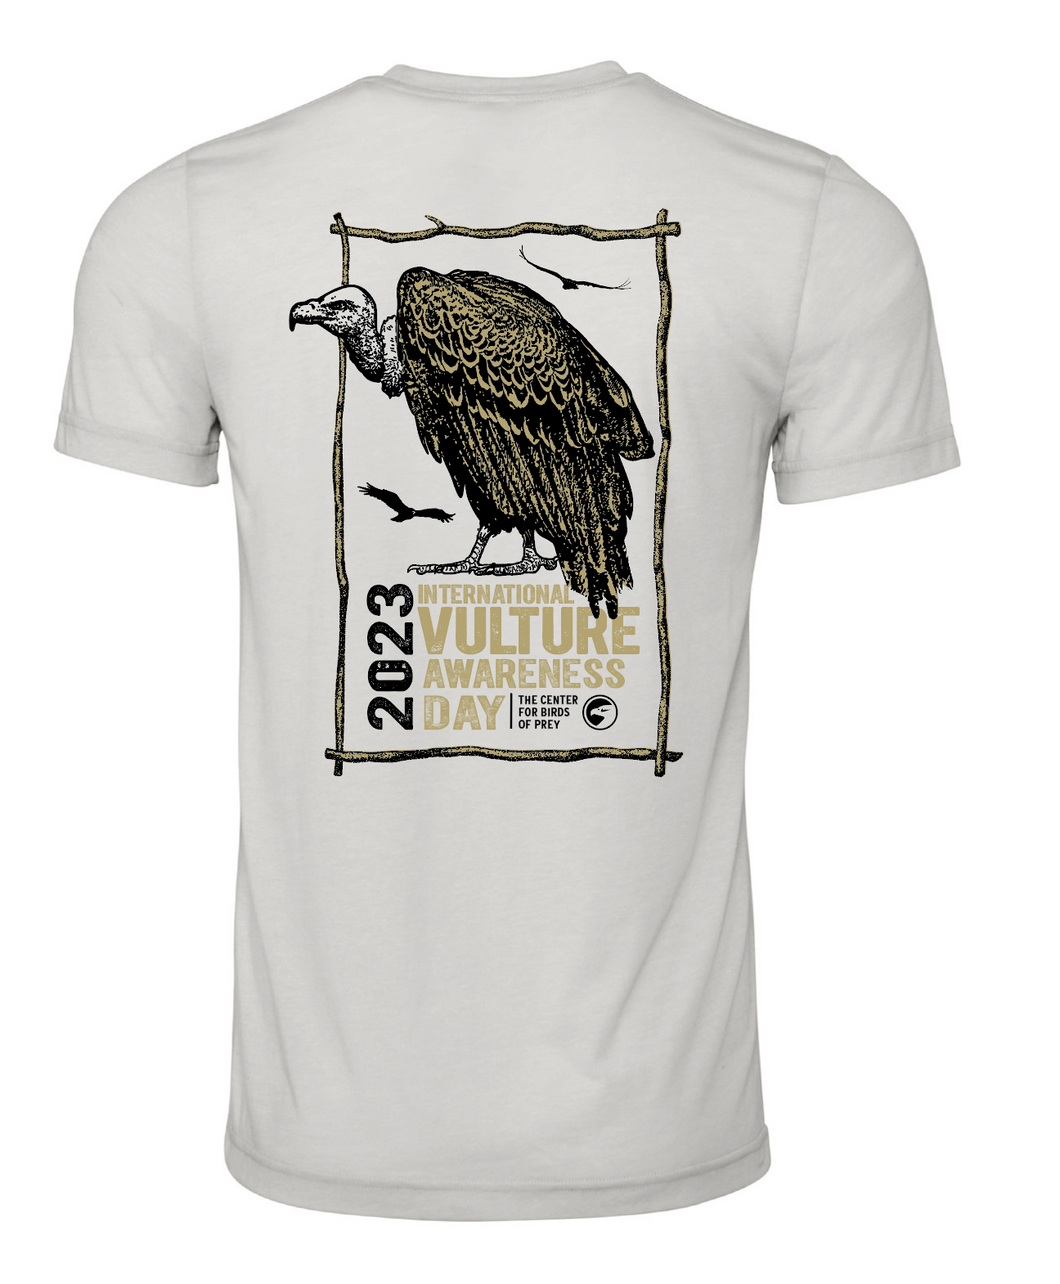 International Vulture Awareness Day 2023 T-shirt - Limited Edition